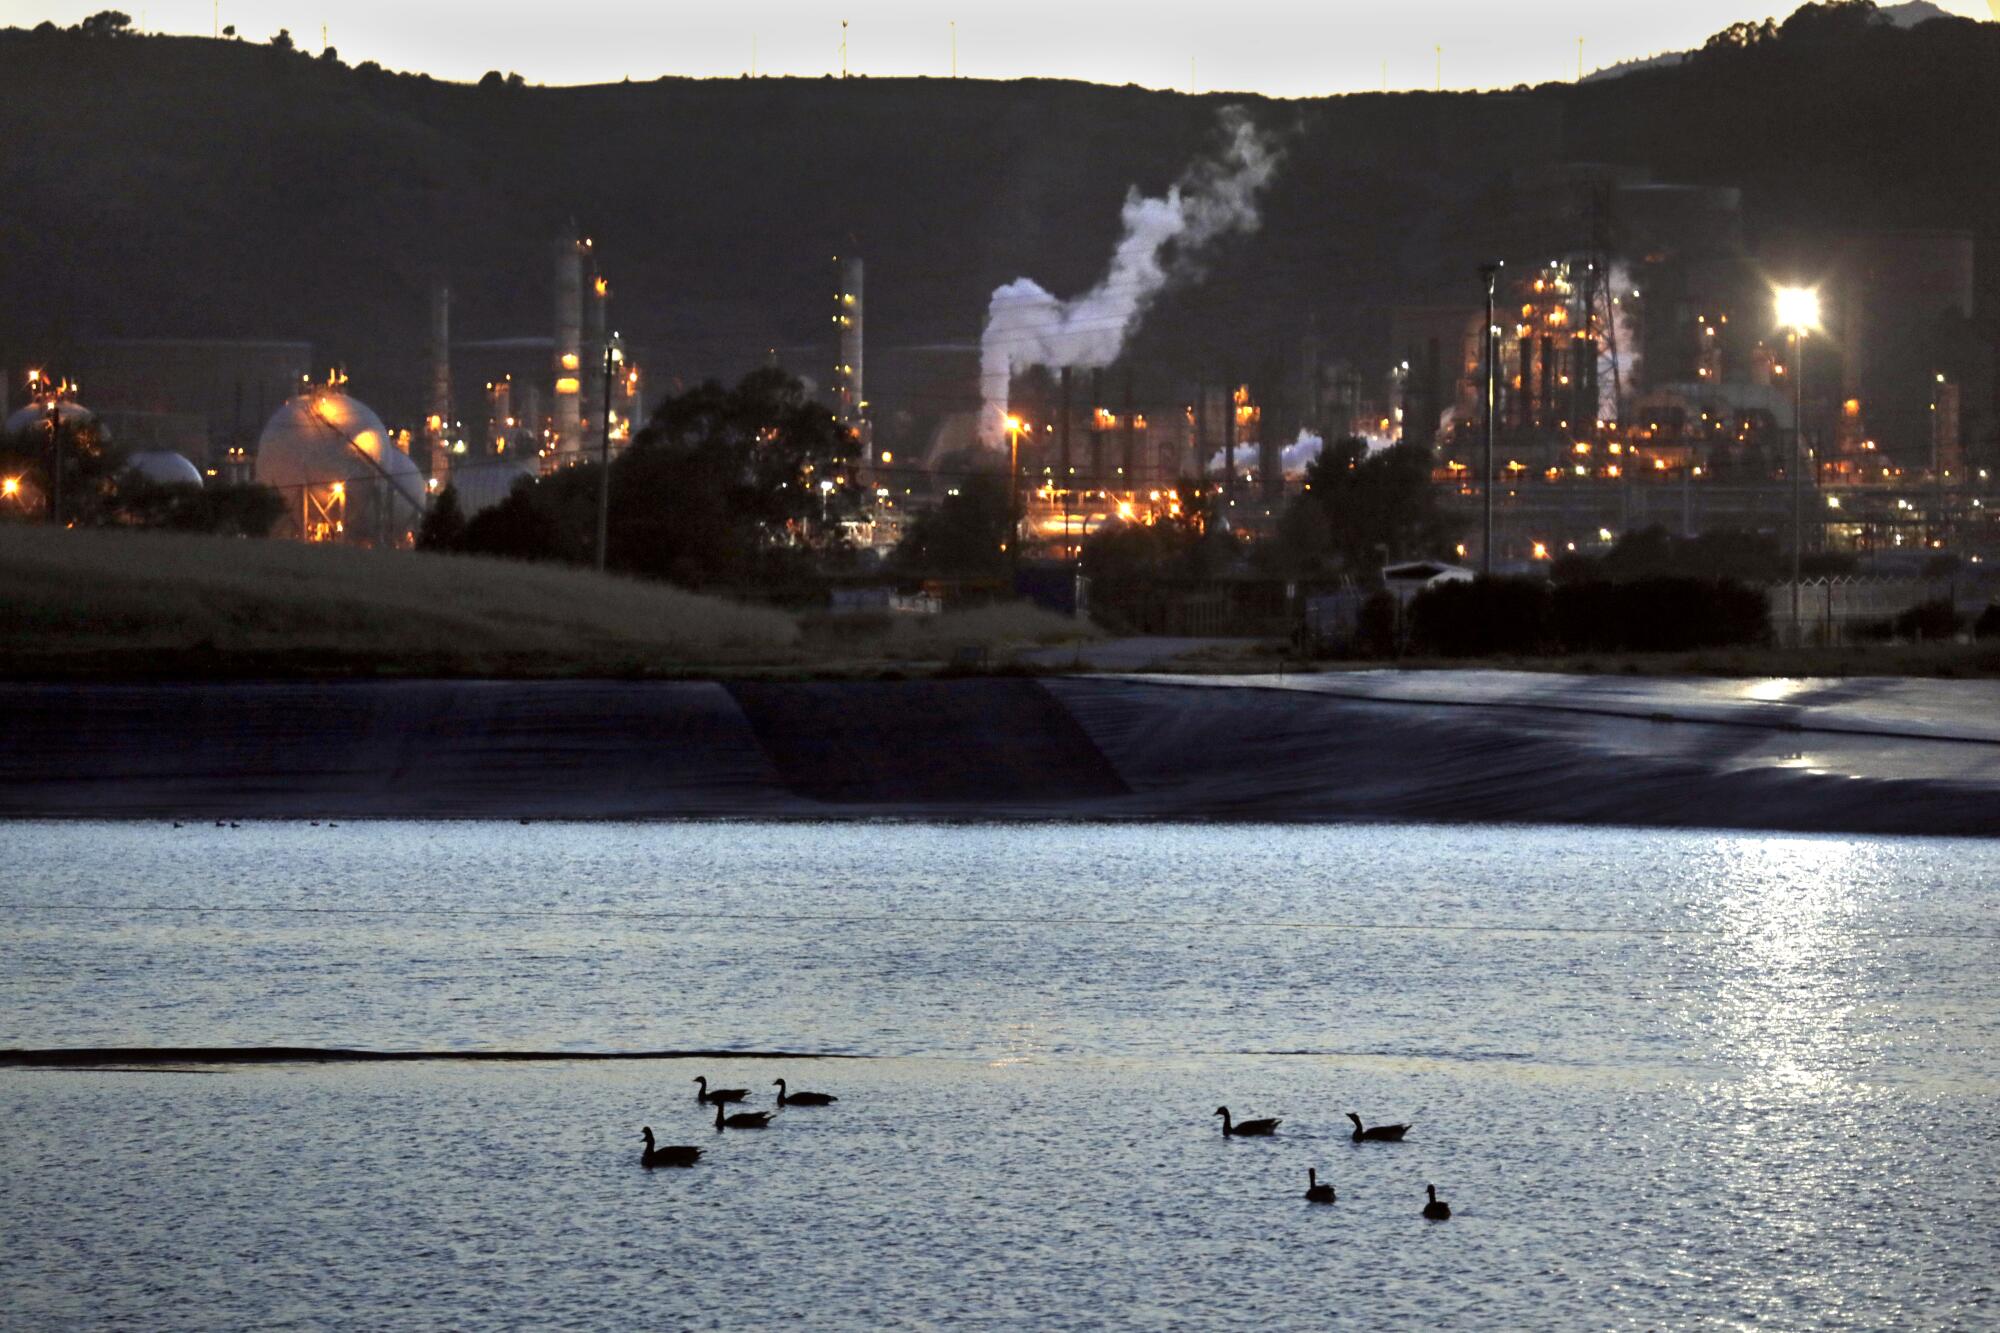 In Richmond, the Chevron refinery is one of the major employers. 